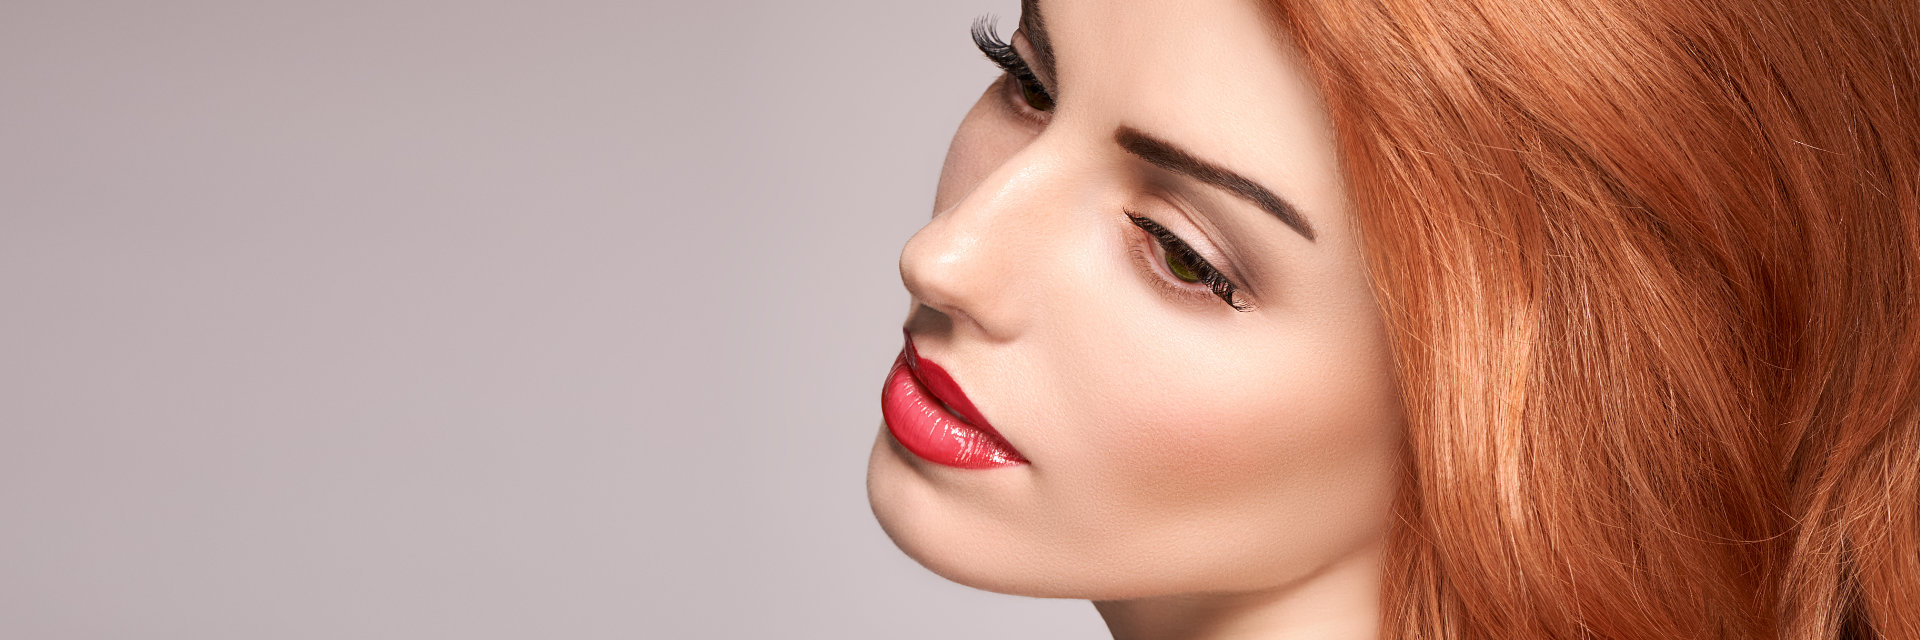 face of a beautiful re-haired woman with long lashes and red lips.